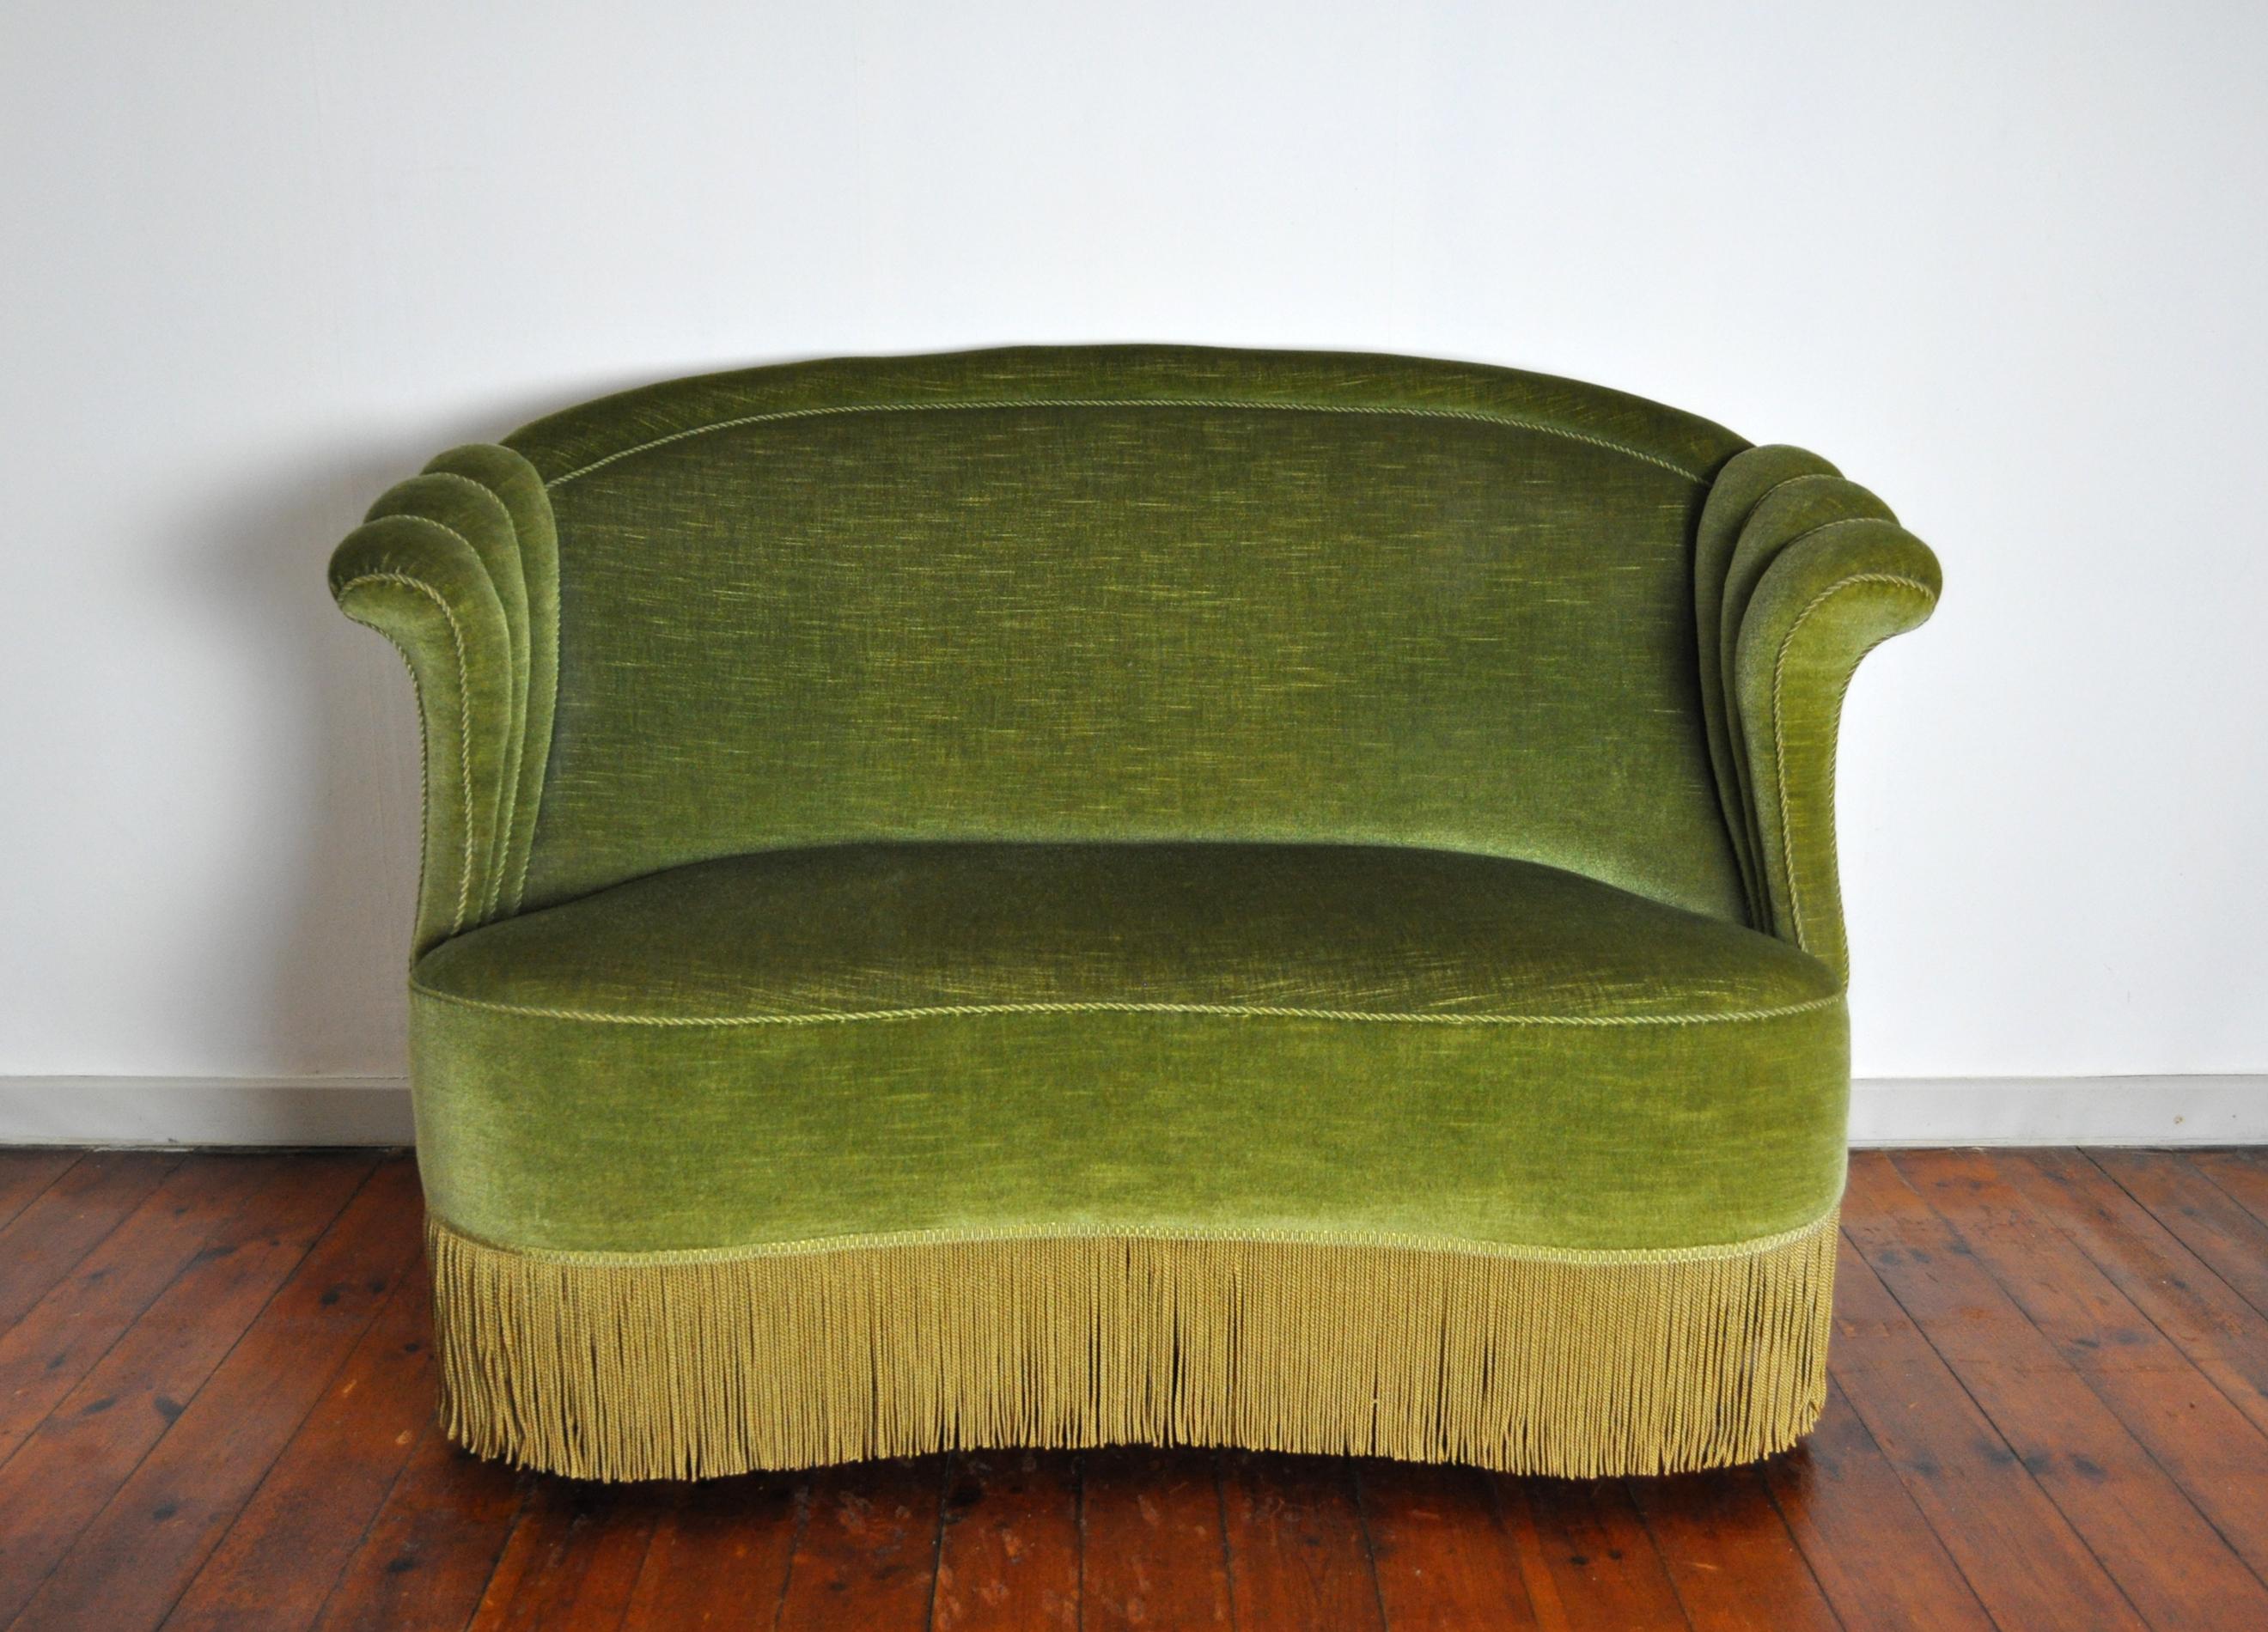 Voluptuous Art Deco sofa executed with wooden legs, green velvet and fringes (can be removed). High lined and curved back and backrest.
It shows traits of traditional Victorian furniture yet also has a contemporary art deco touch.
Excellent